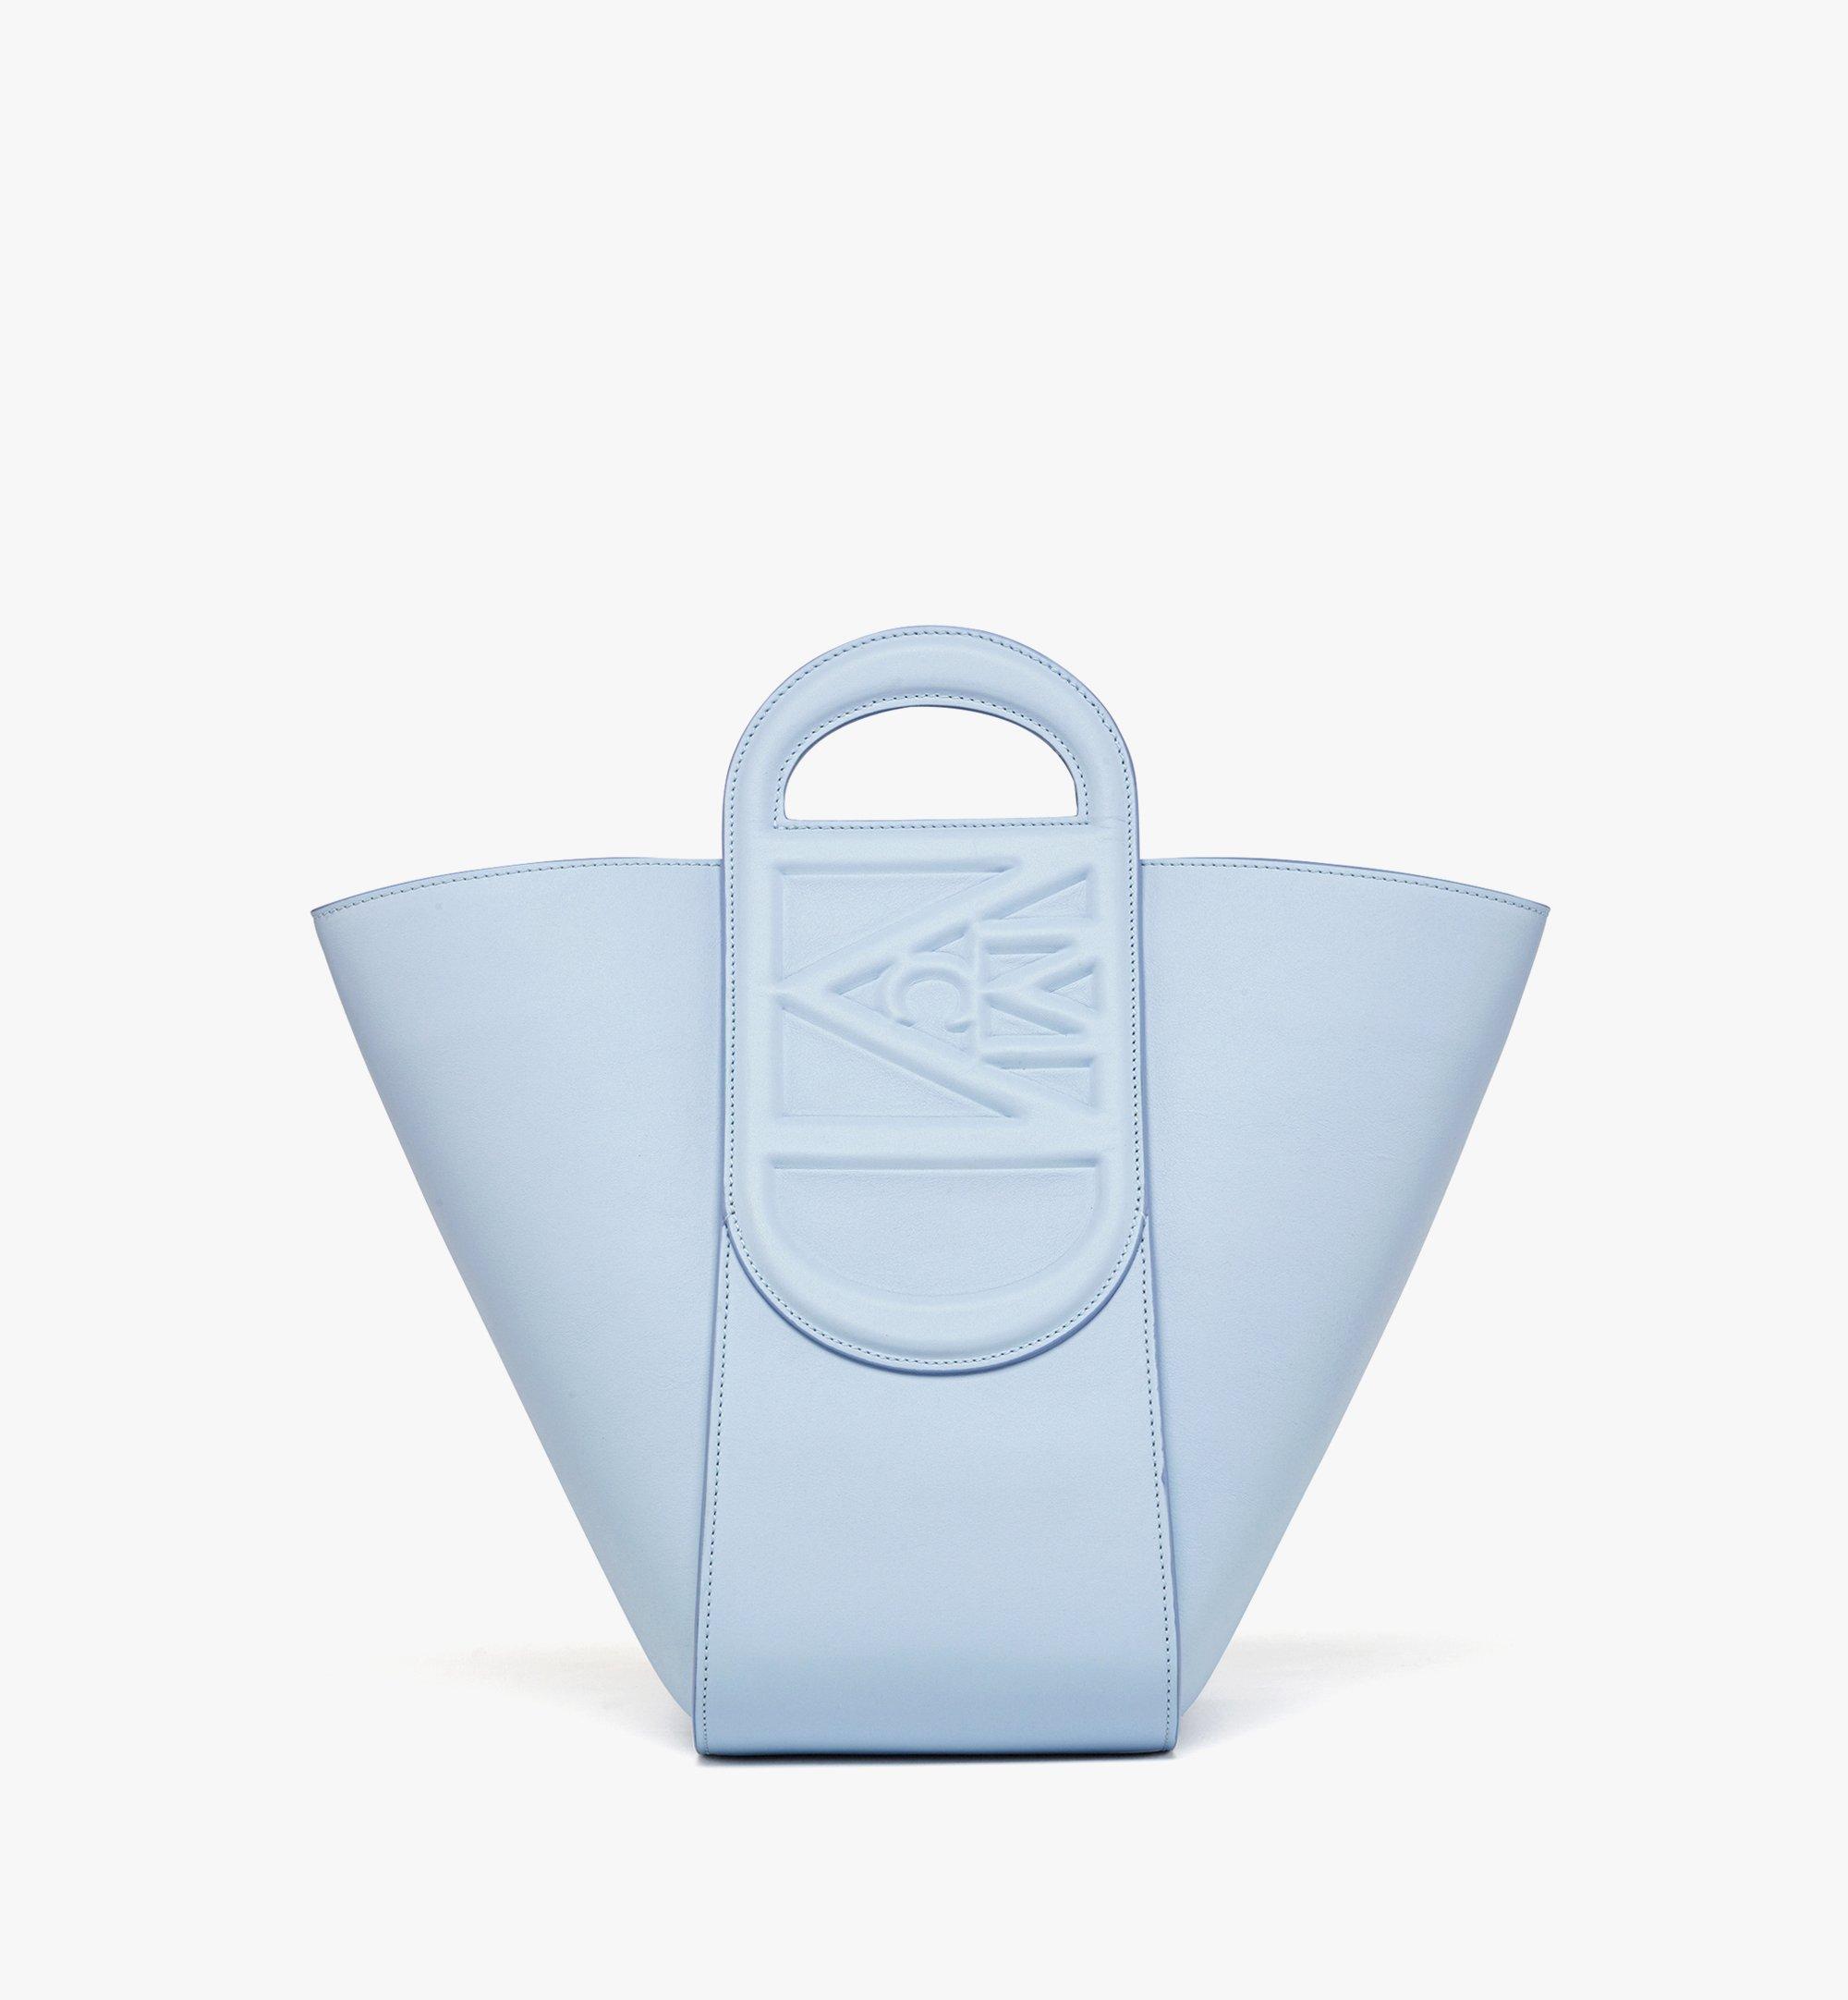 Large Mode Travia Tote in Spanish Nappa Leather Blue | MCM ®PT